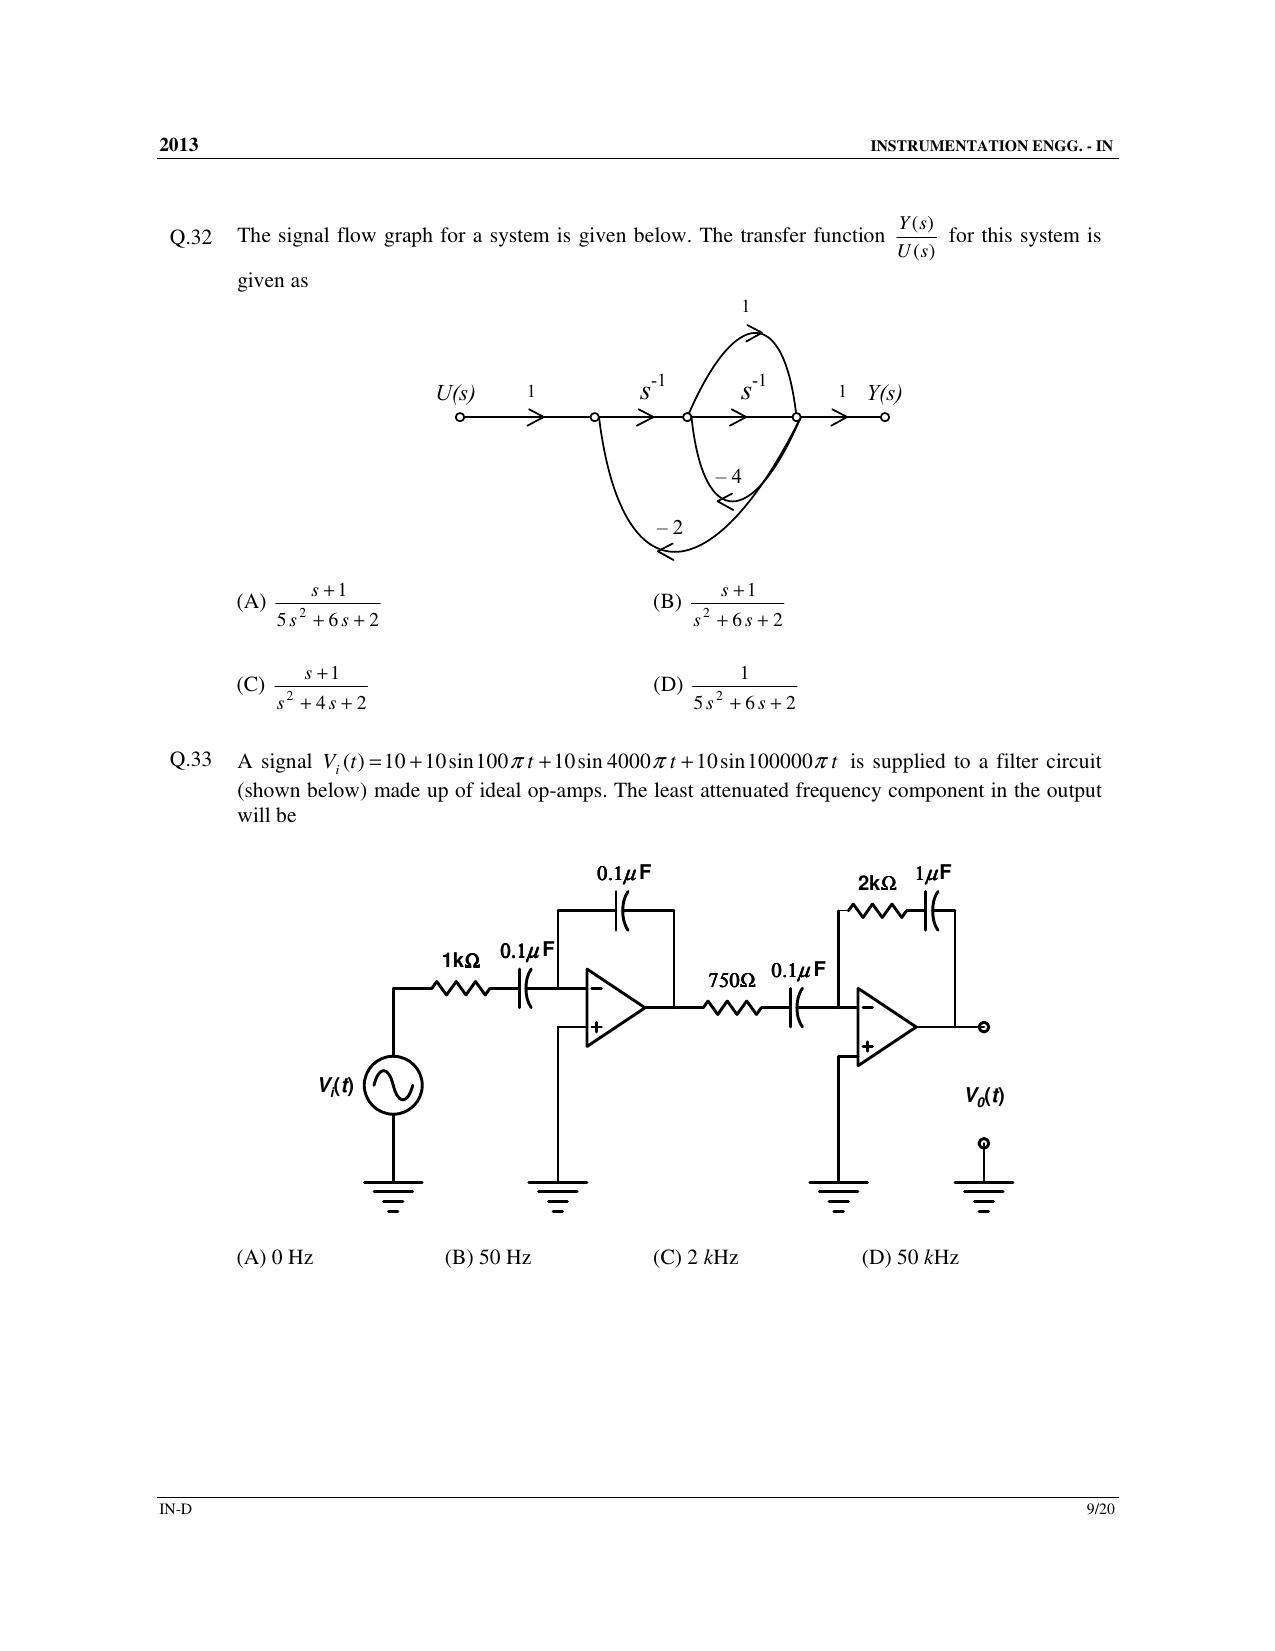 GATE 2013 Instrumentation Engineering (IN) Question Paper with Answer Key - Page 61